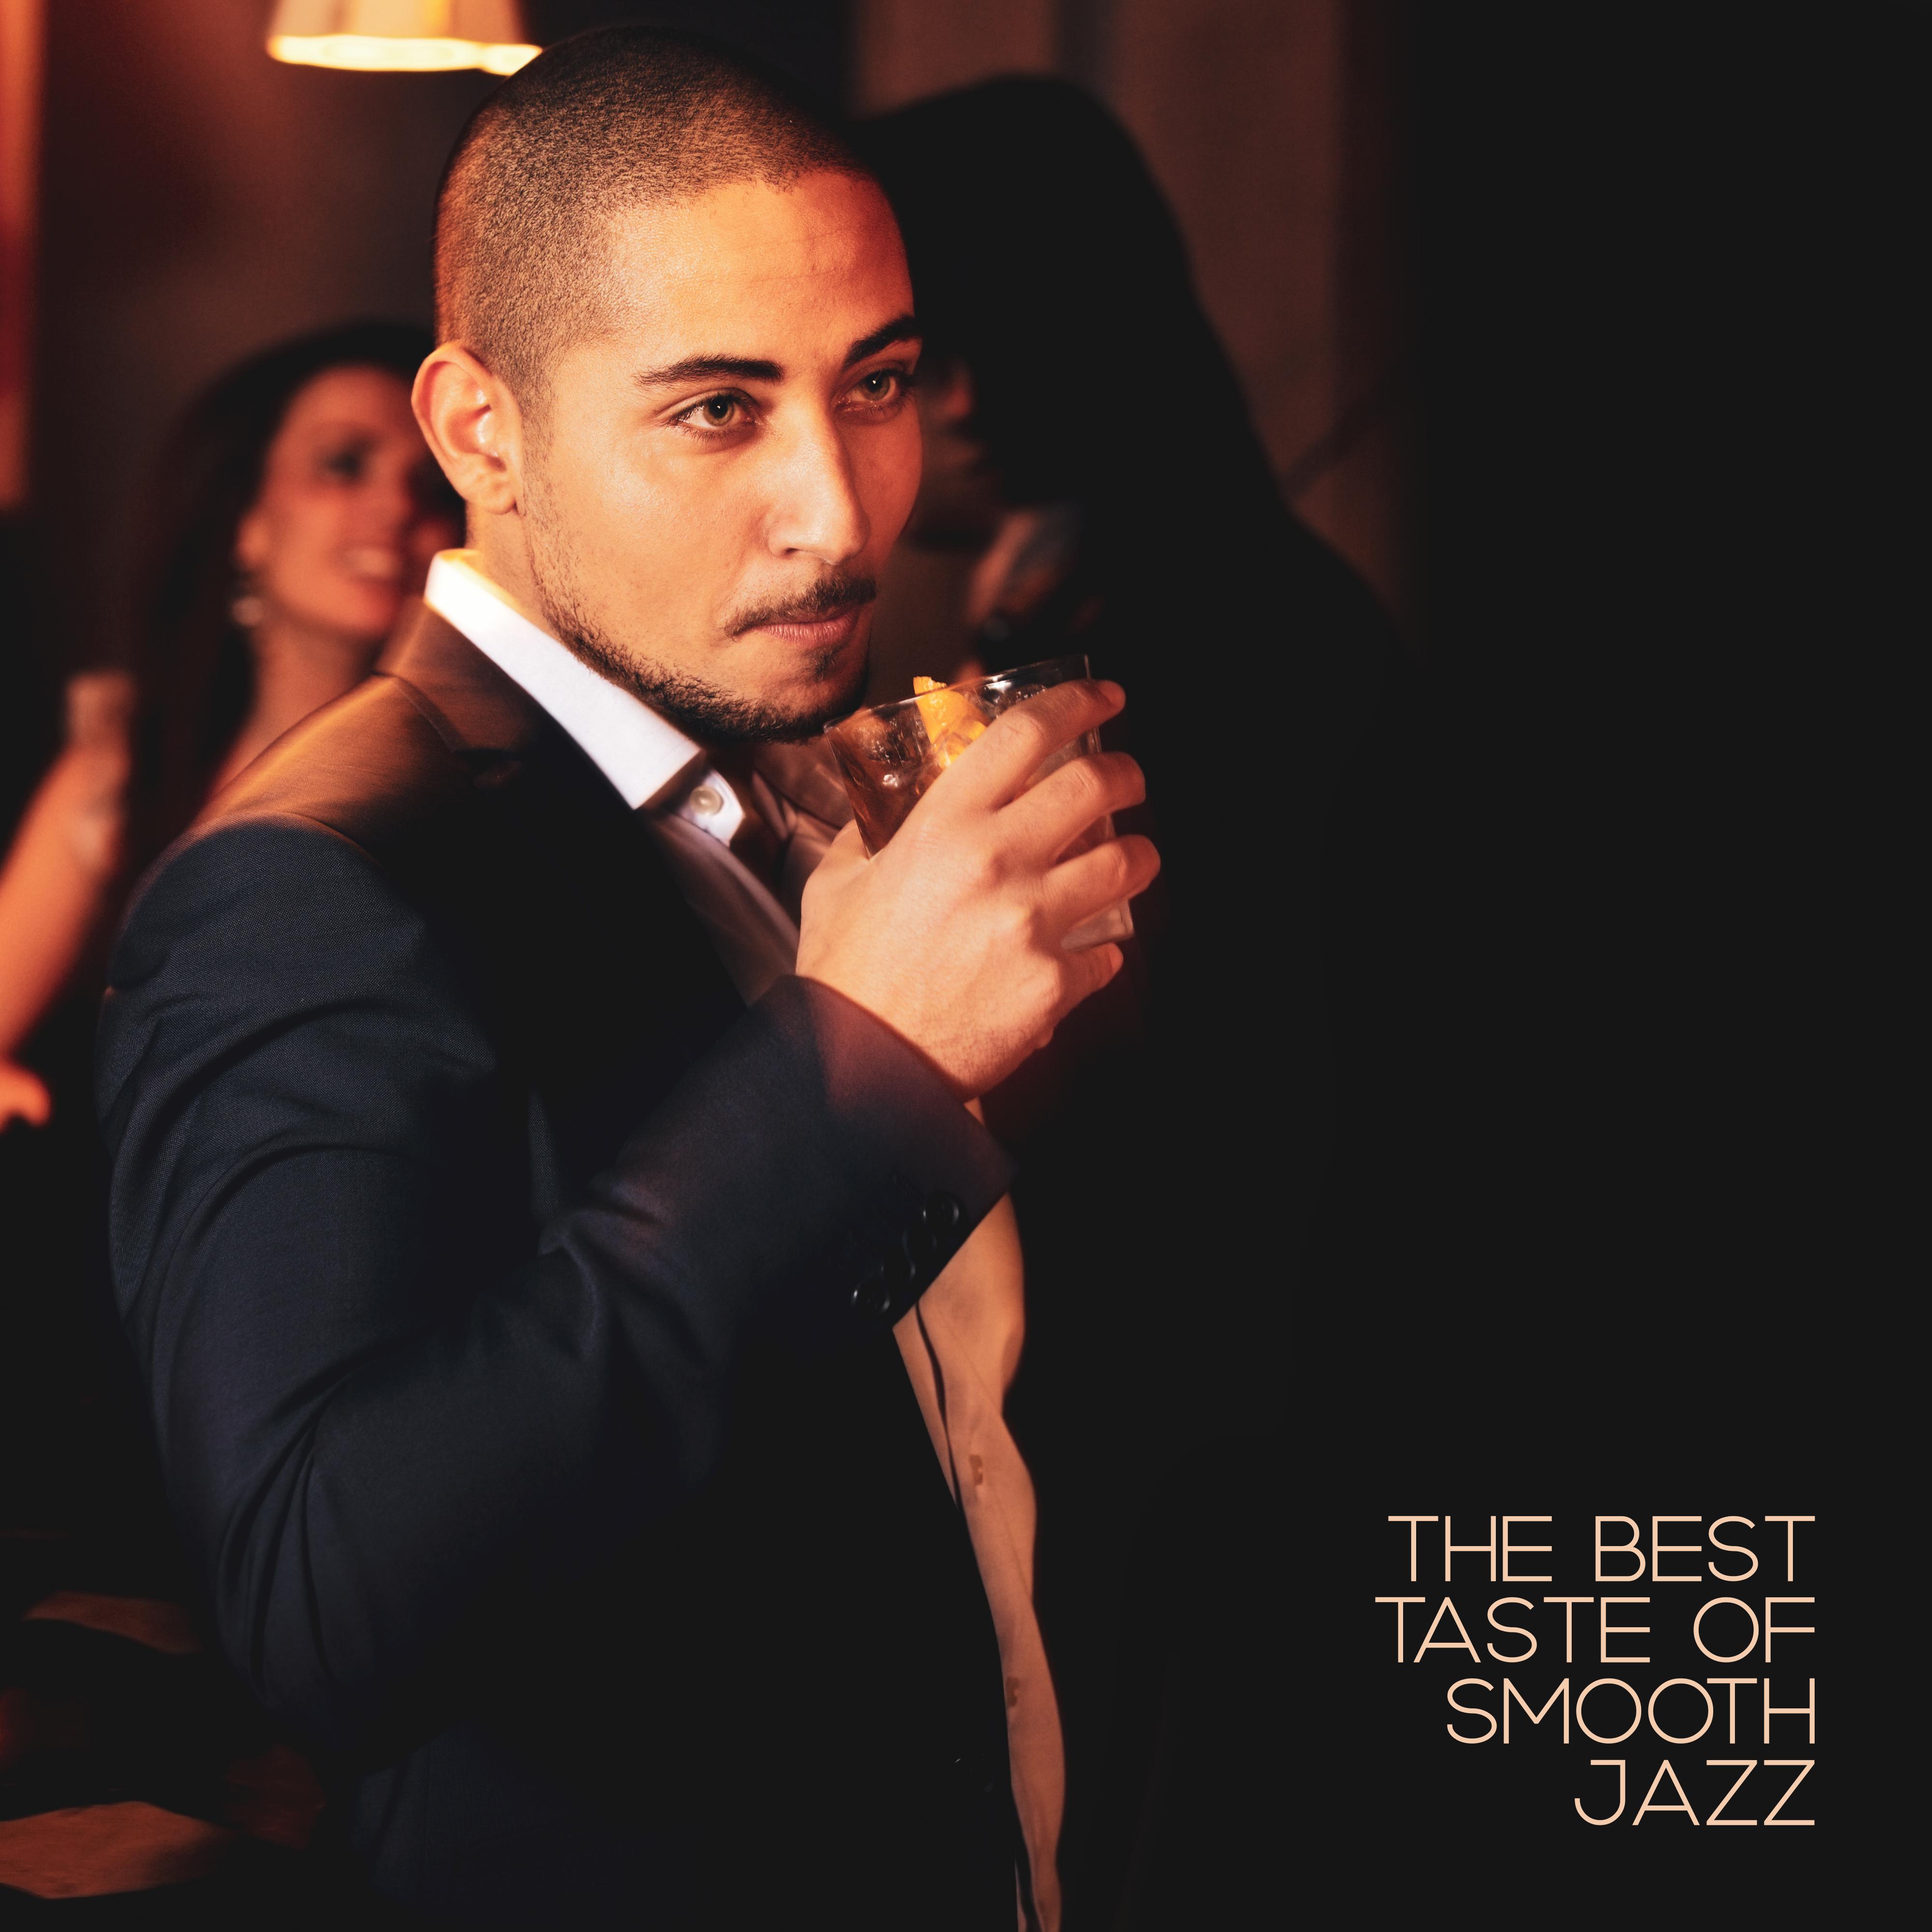 The Best Taste of Smooth Jazz: 2019 Instrumental Jazz Music, Vintage Sounds of Piano, Sax & Others, Perfect Cocktail Party Background Songs